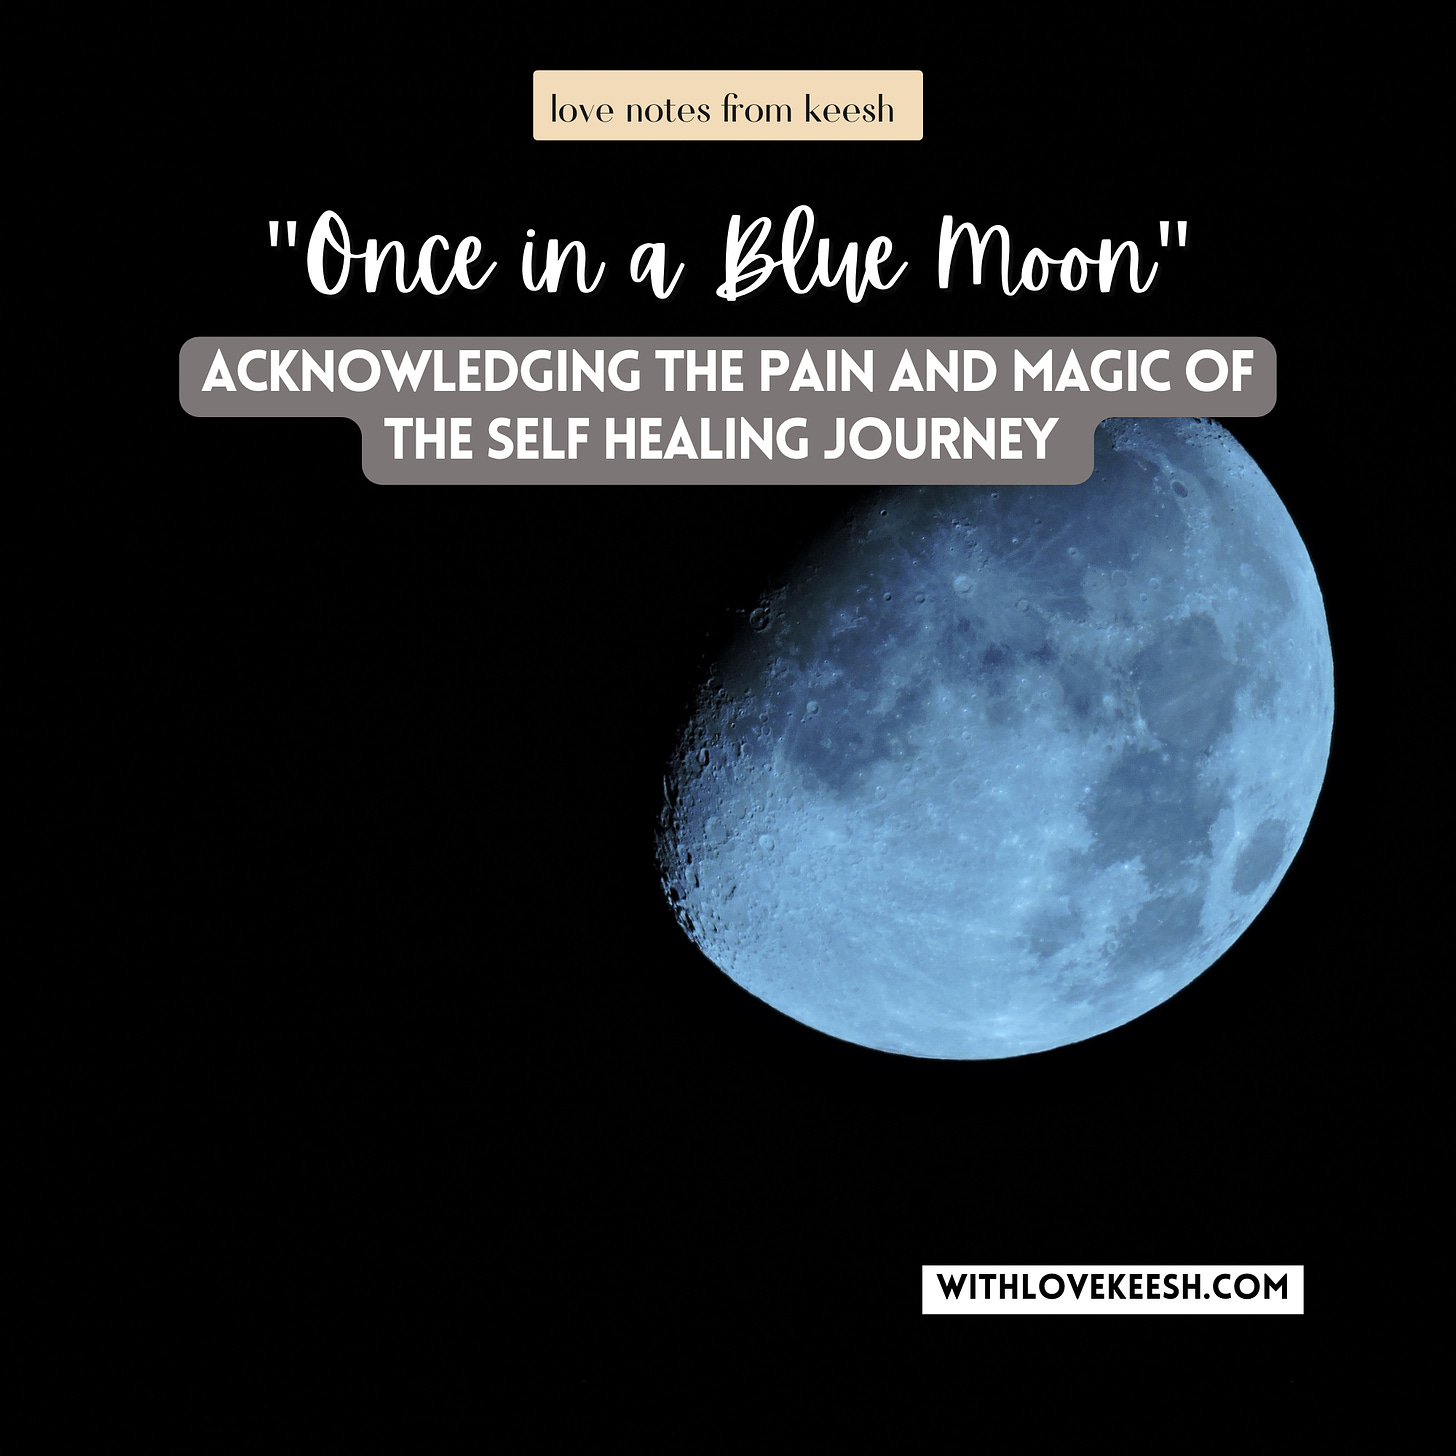 "Once in a Blue Moon" Acknowledging the pain and magic of the self healing journey 